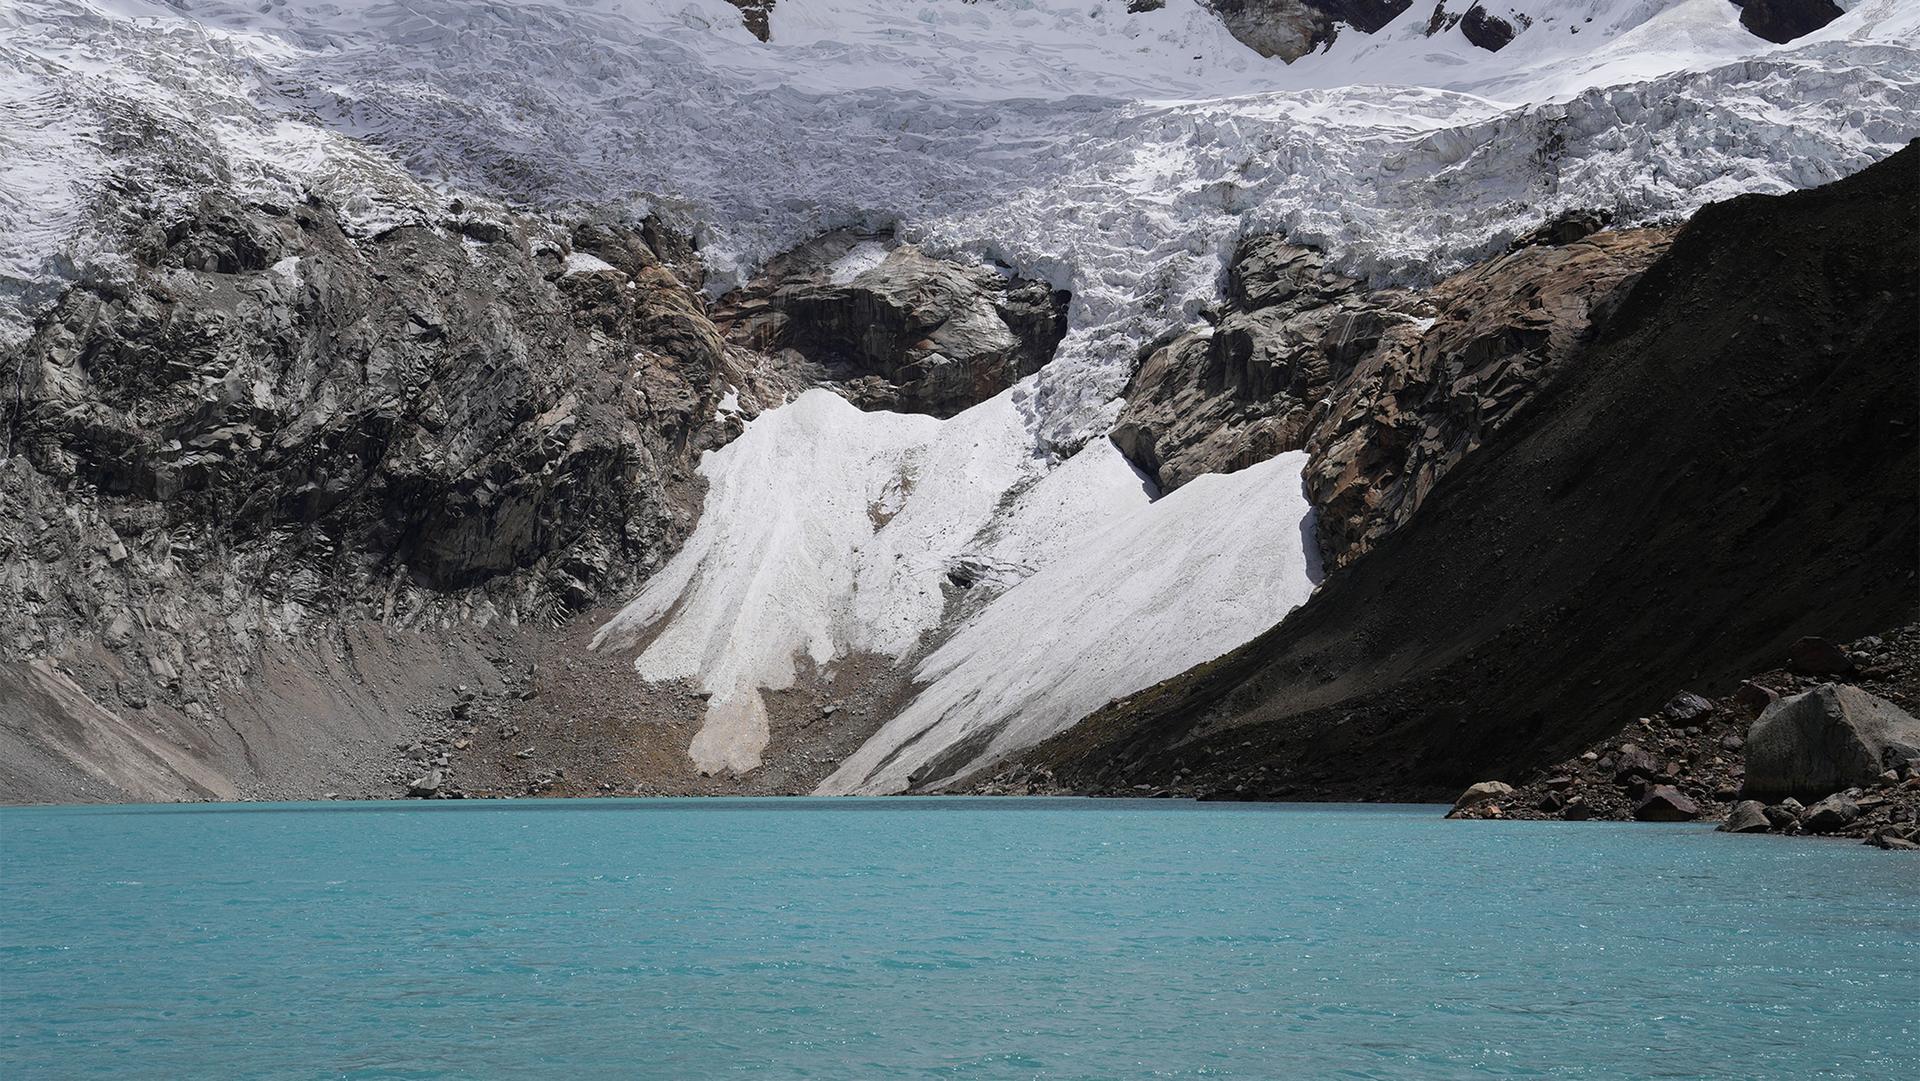 Lake Palcacocha is located in Peru's Ancash region, at 15,000 feet above sea level.